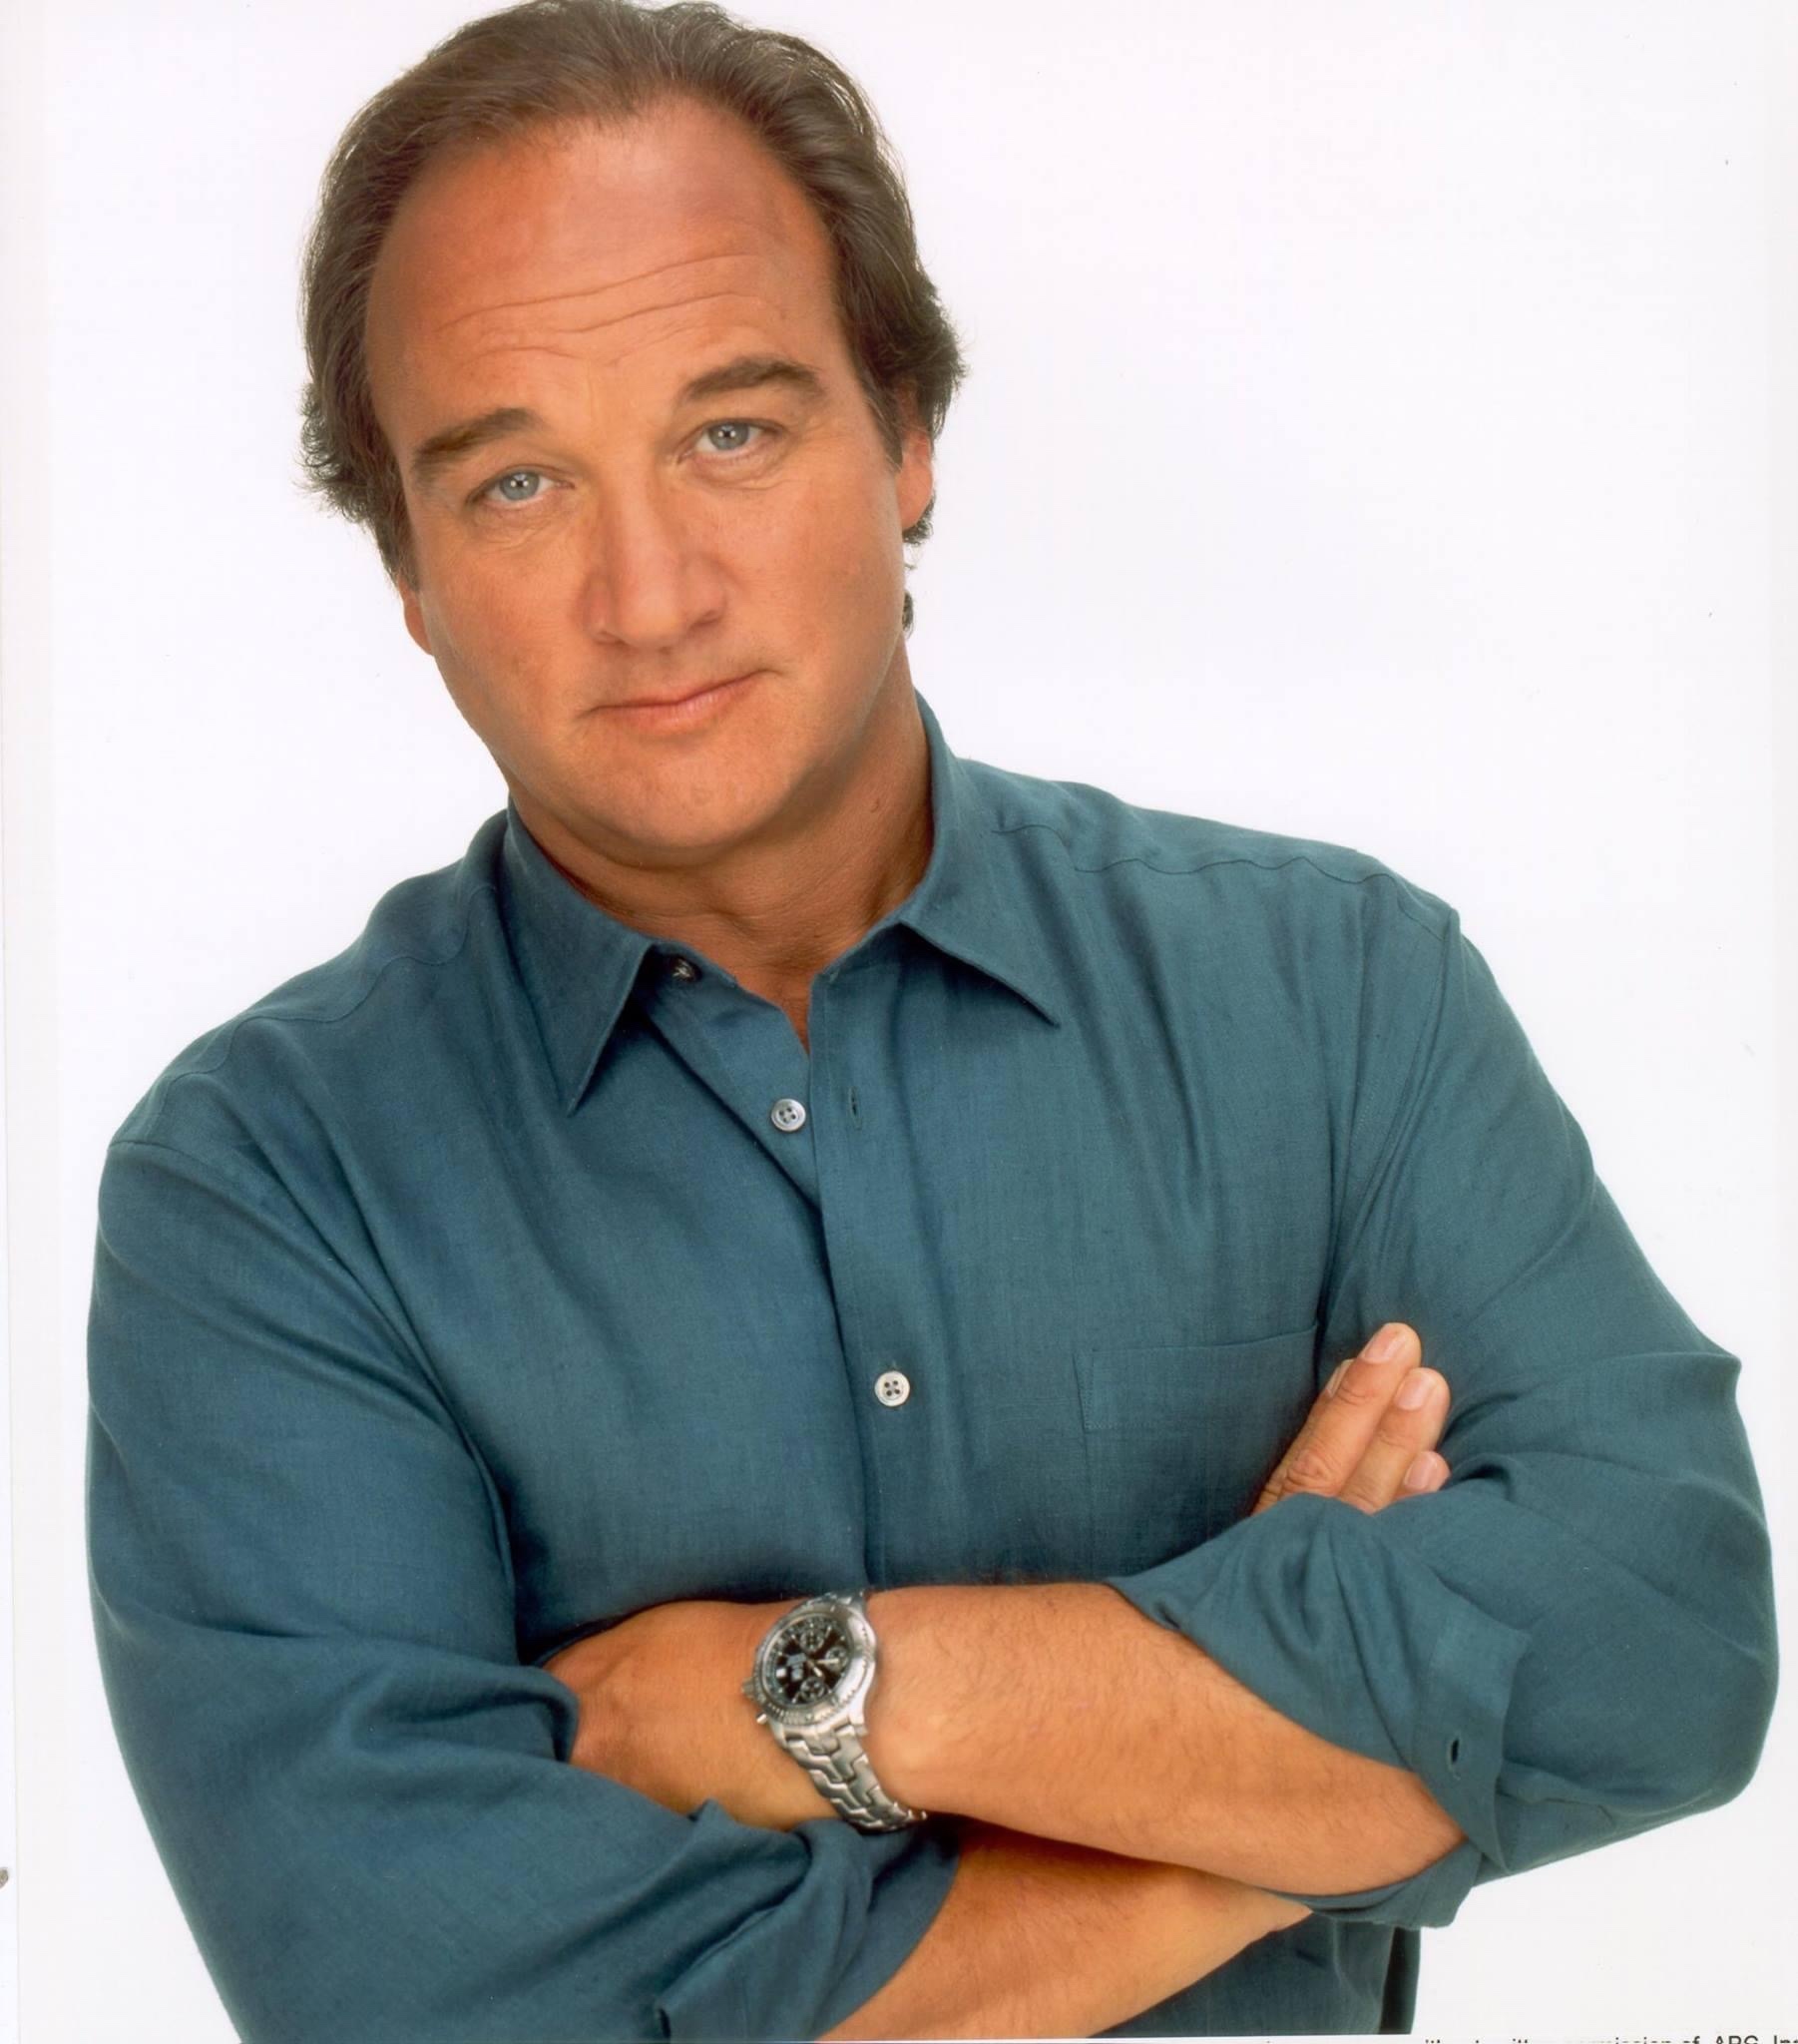 Jim Belushi Biography and Net Worth Contents101